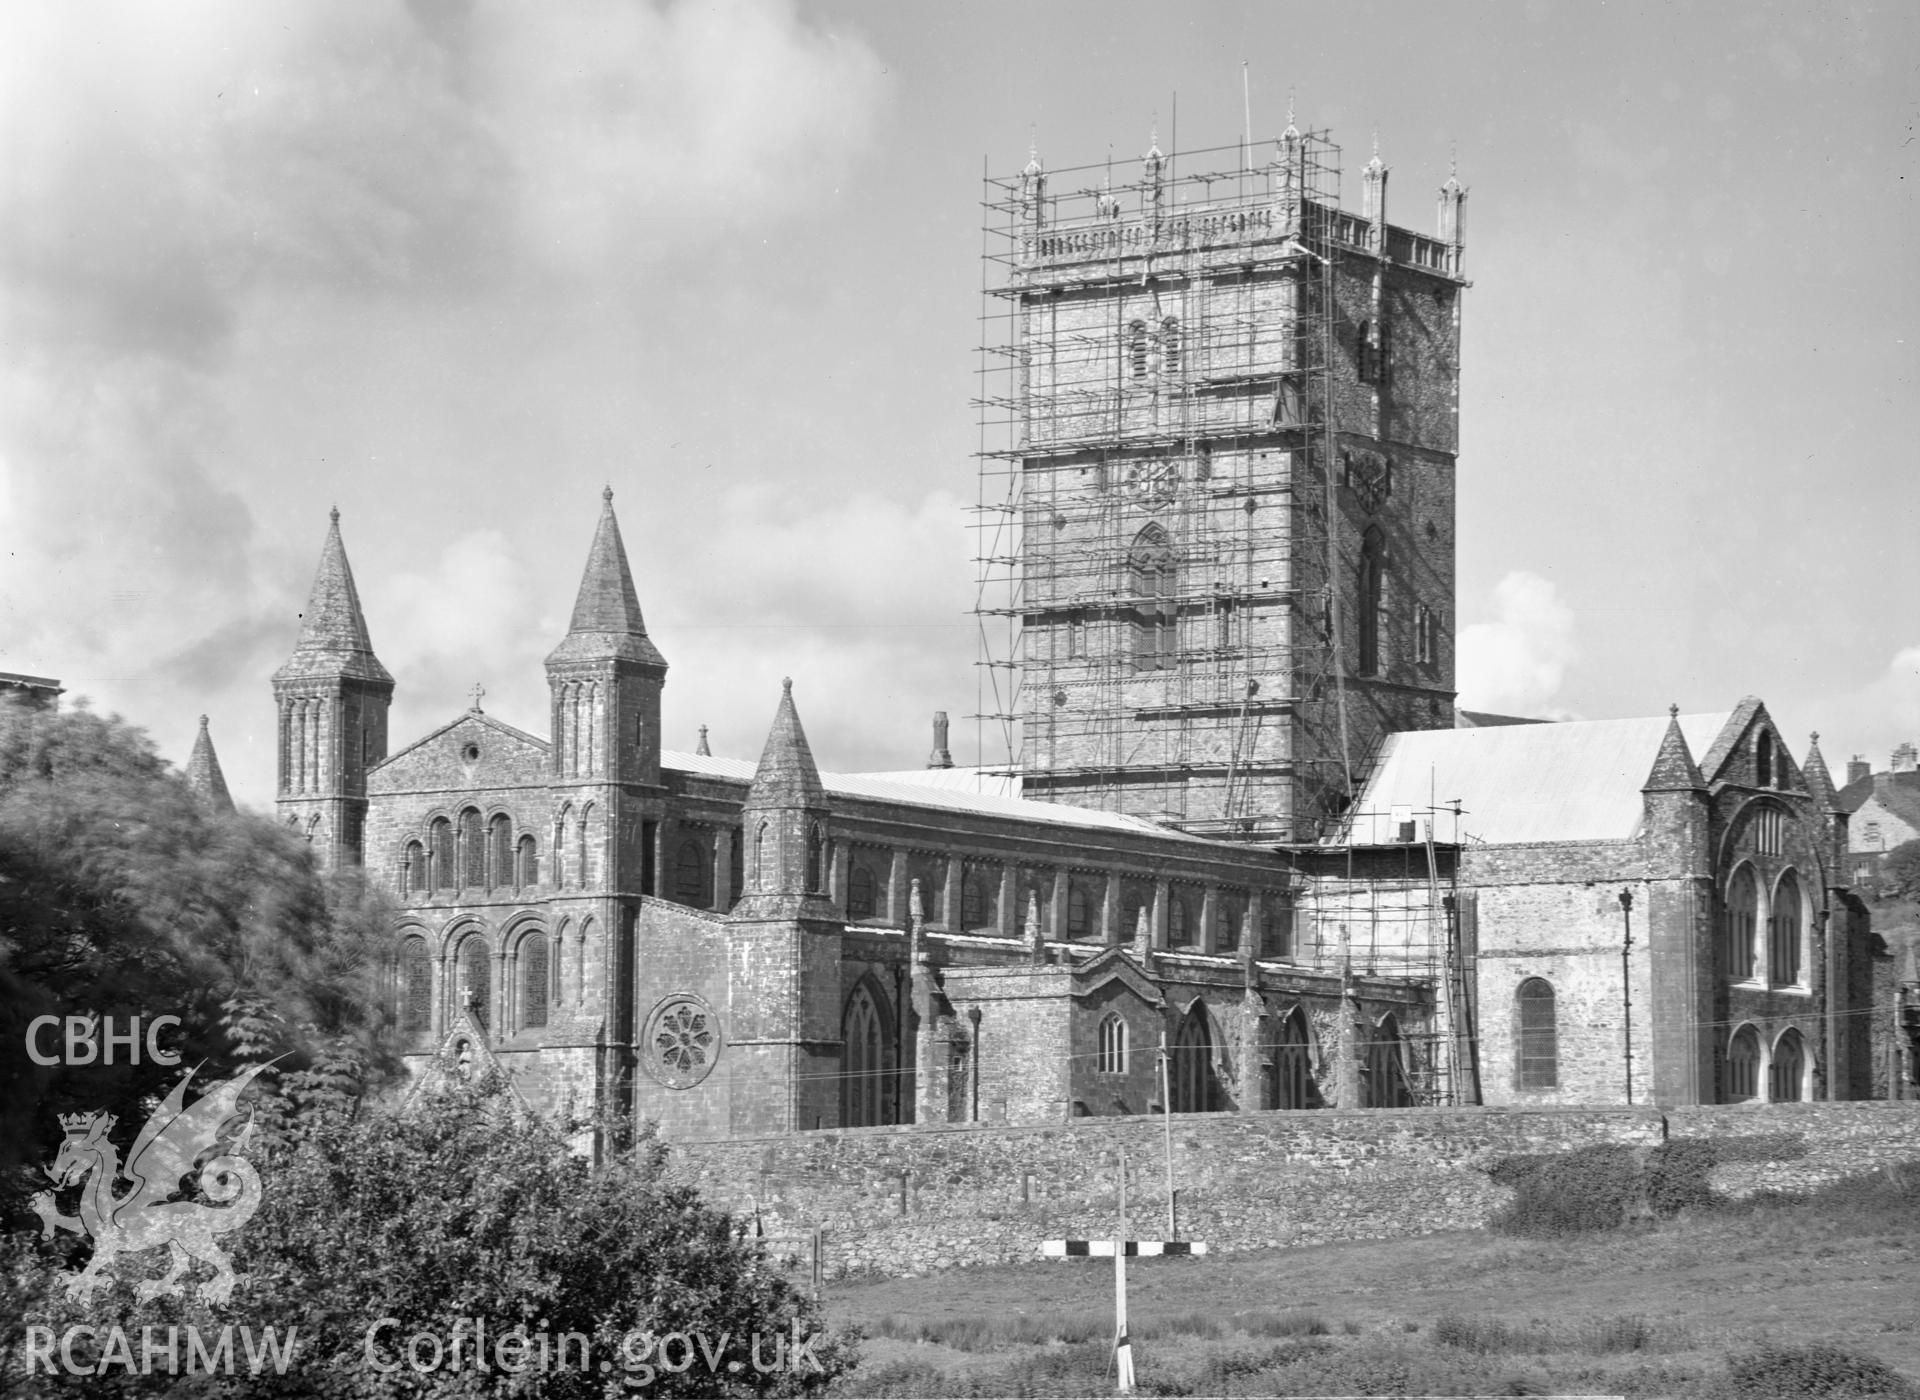 Digital copy of a black and white nitrate negative showing general view of St. David's Cathedral, taken by E.W. Lovegrove, July 1936.